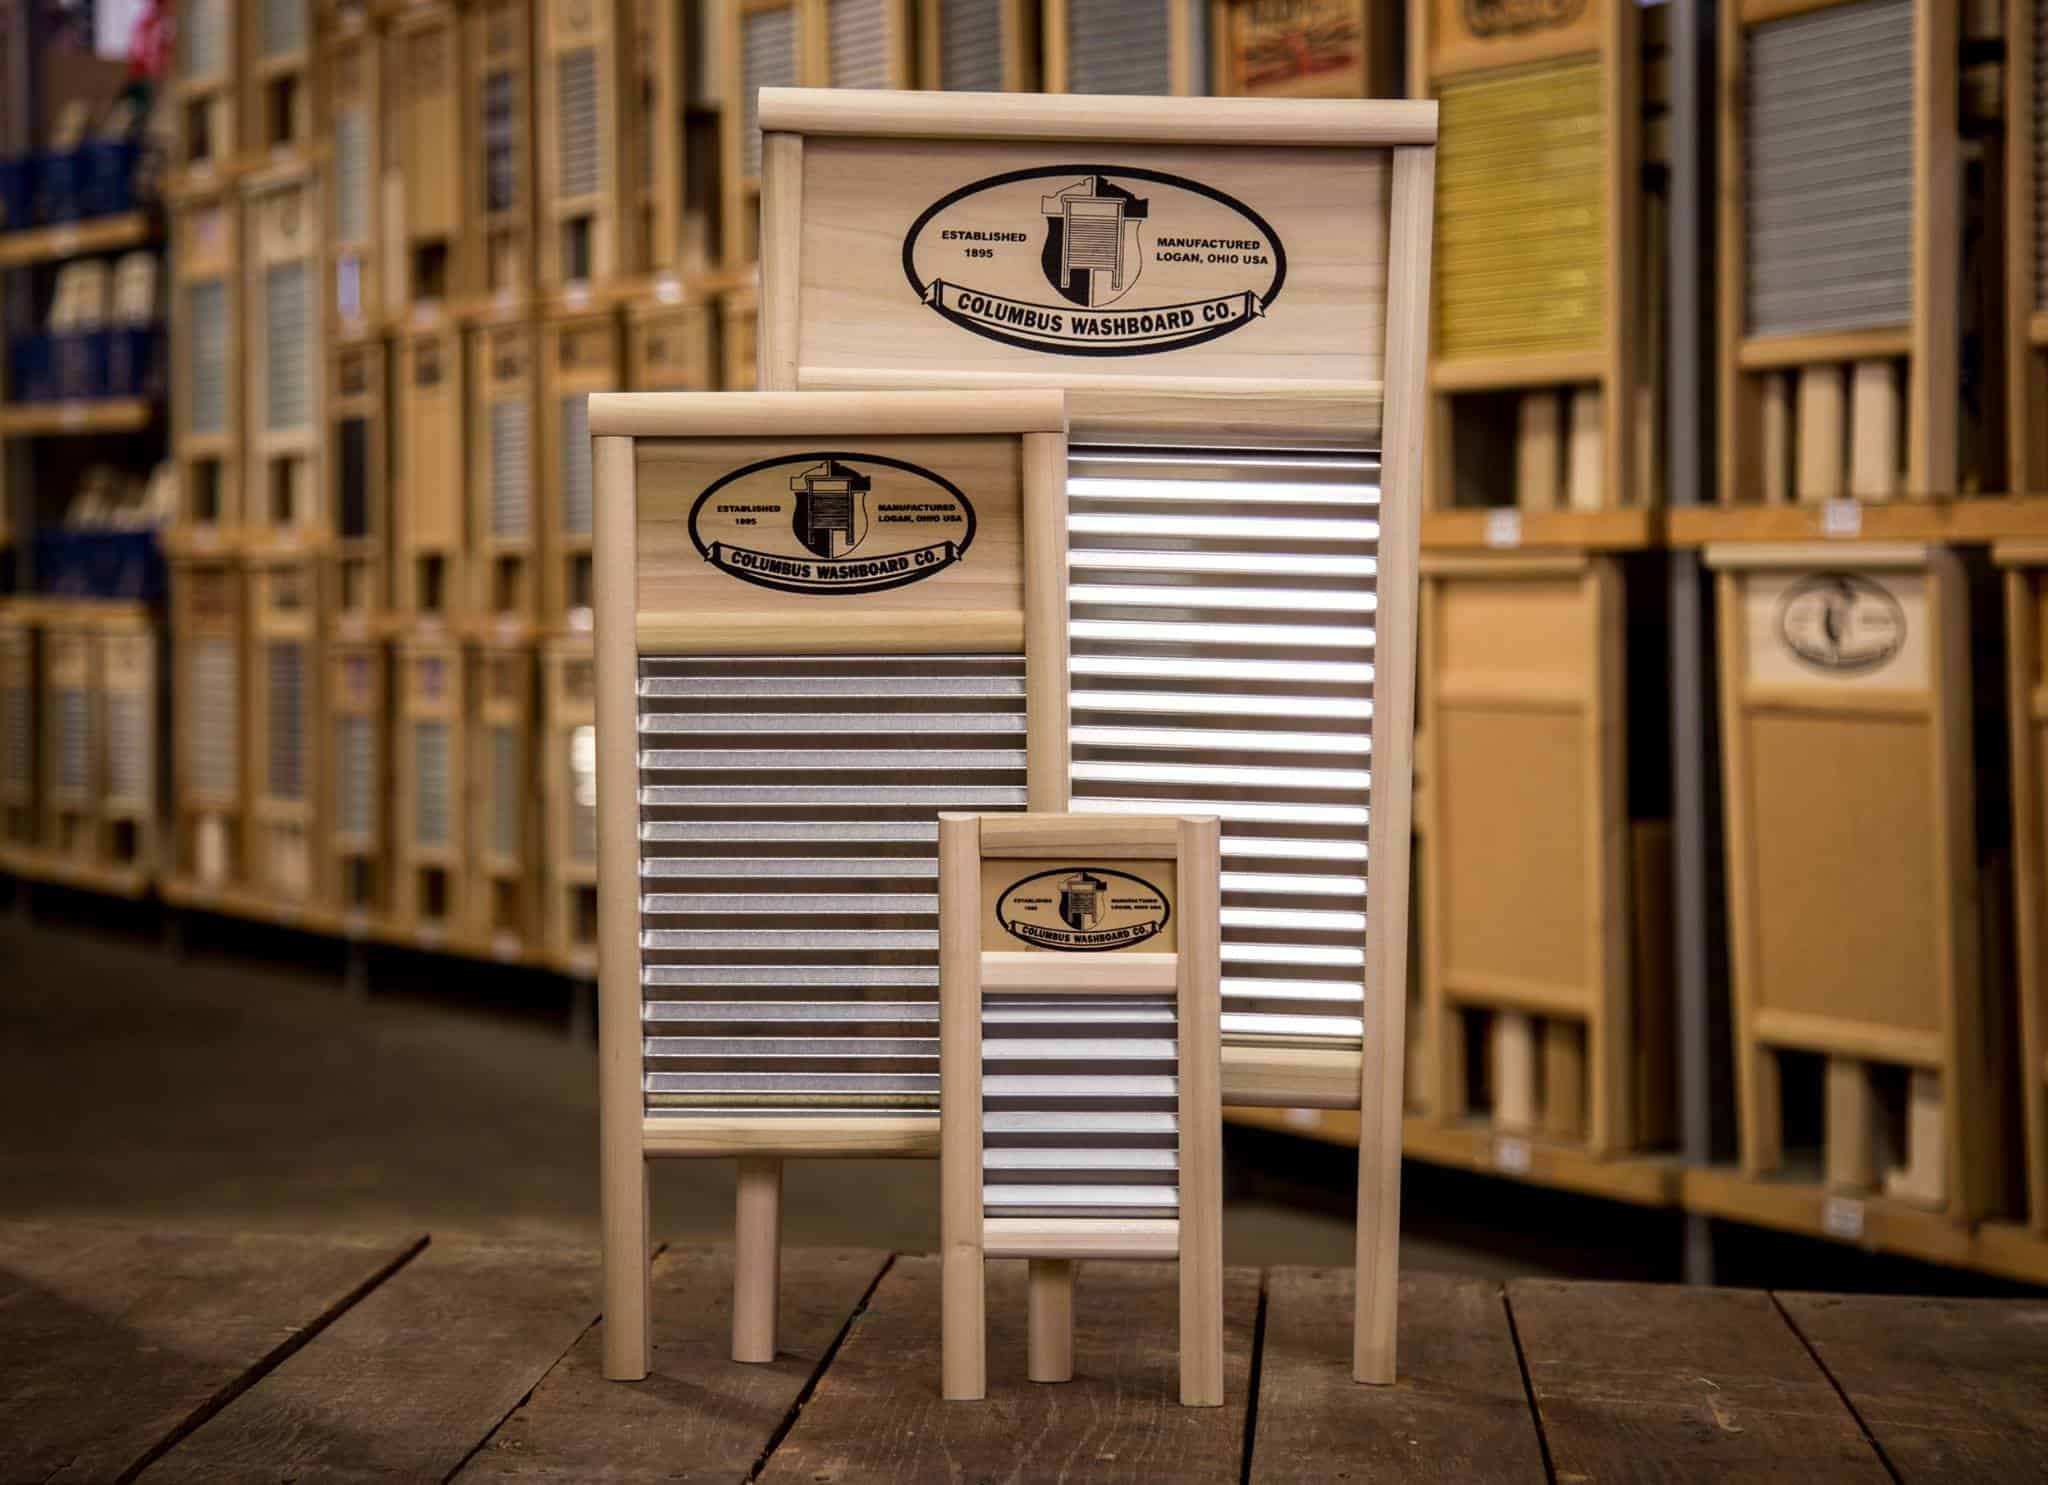 Washboards at the Columbus Washboard Company Factory Tours